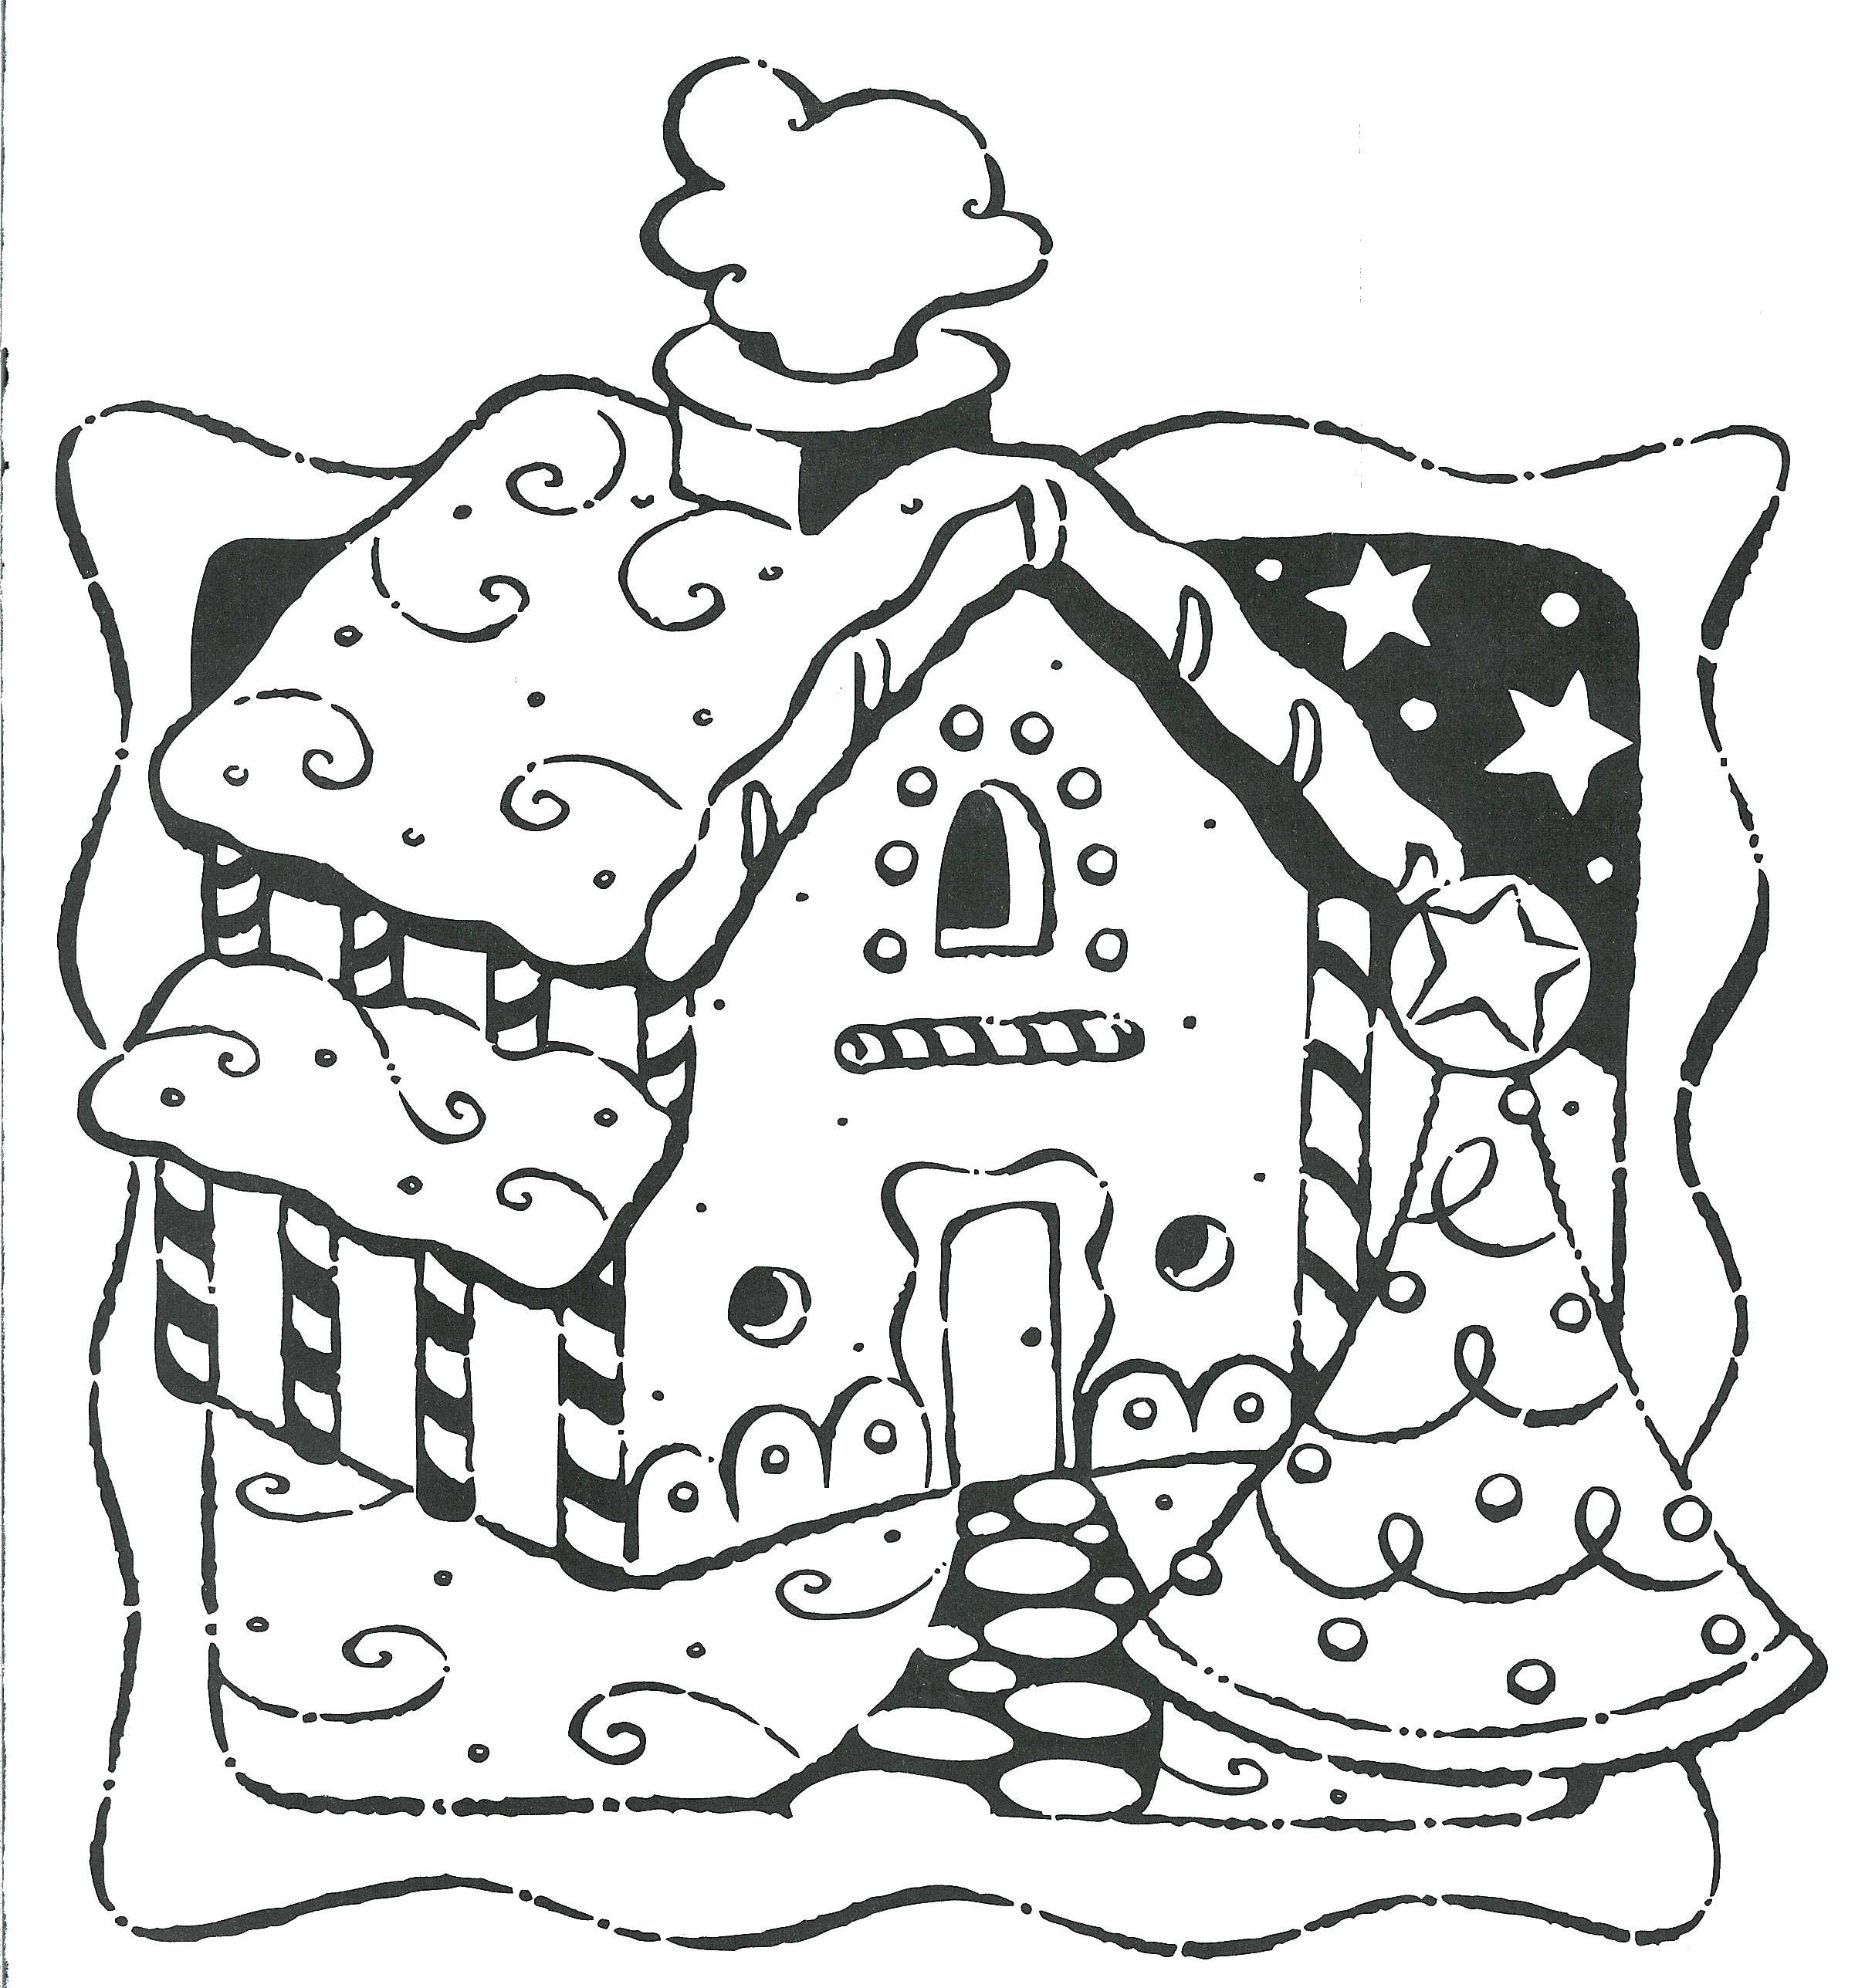 Coloring Candy house. Category Coloring house. Tags:  House, building.